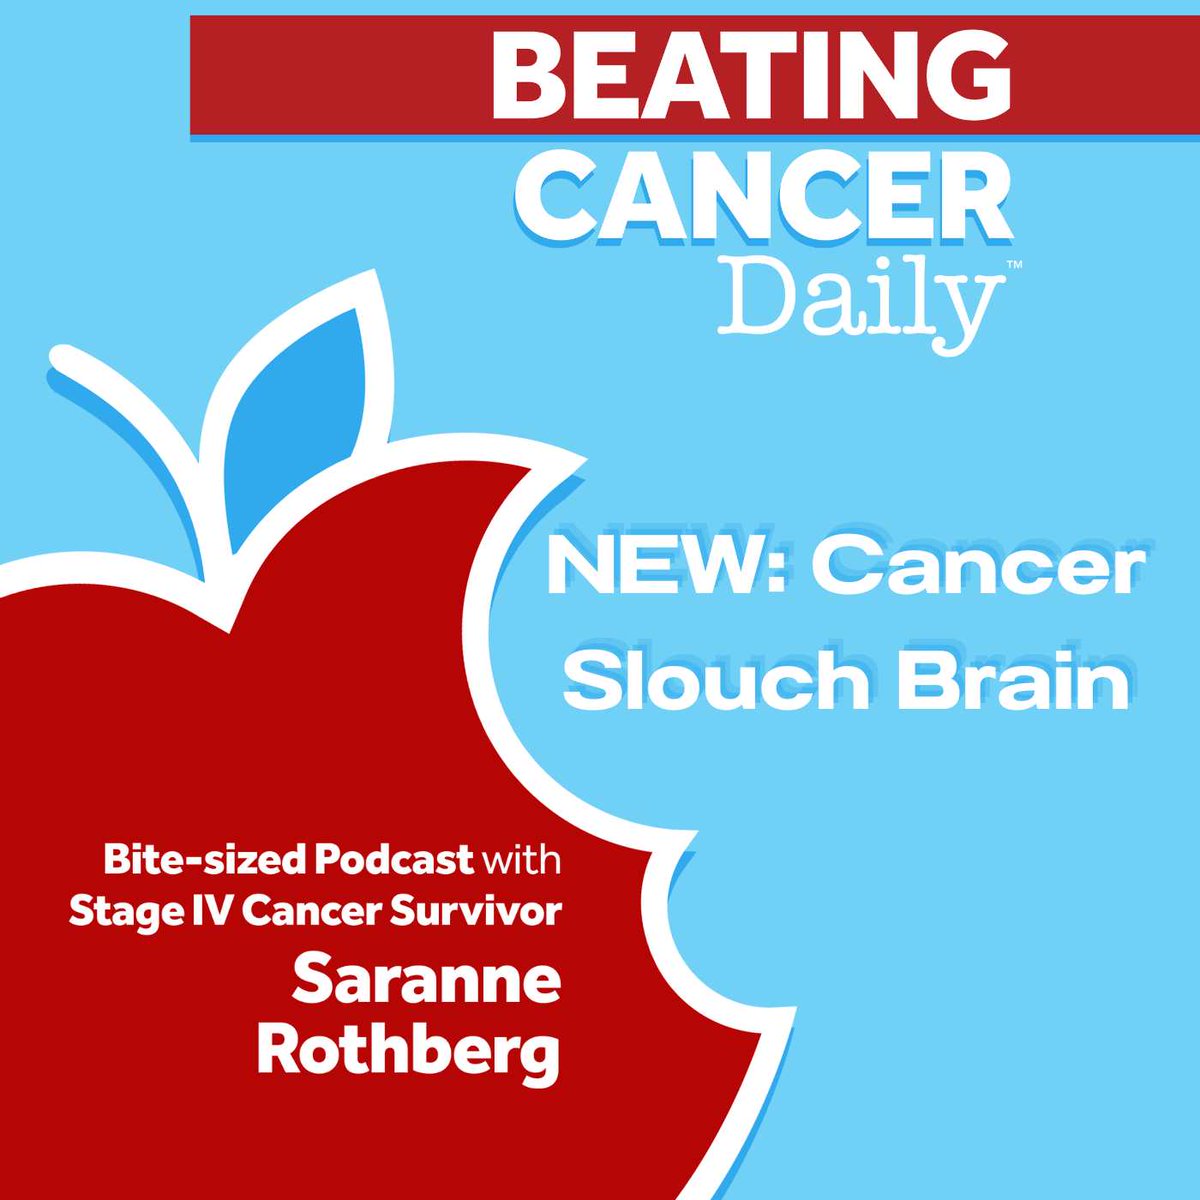 Today on #BeatingCancerDaily, NEW: Cancer Slouch Brain
Listen wherever you listen to podcasts. 
ComedyCures.org

#ComedyCures #LaughDaily #InstaLaugh #laughtherapy #NonProfit #nonprofitlife #standupcomedian #survivor #remission #cancersurvivor #cancertreatment